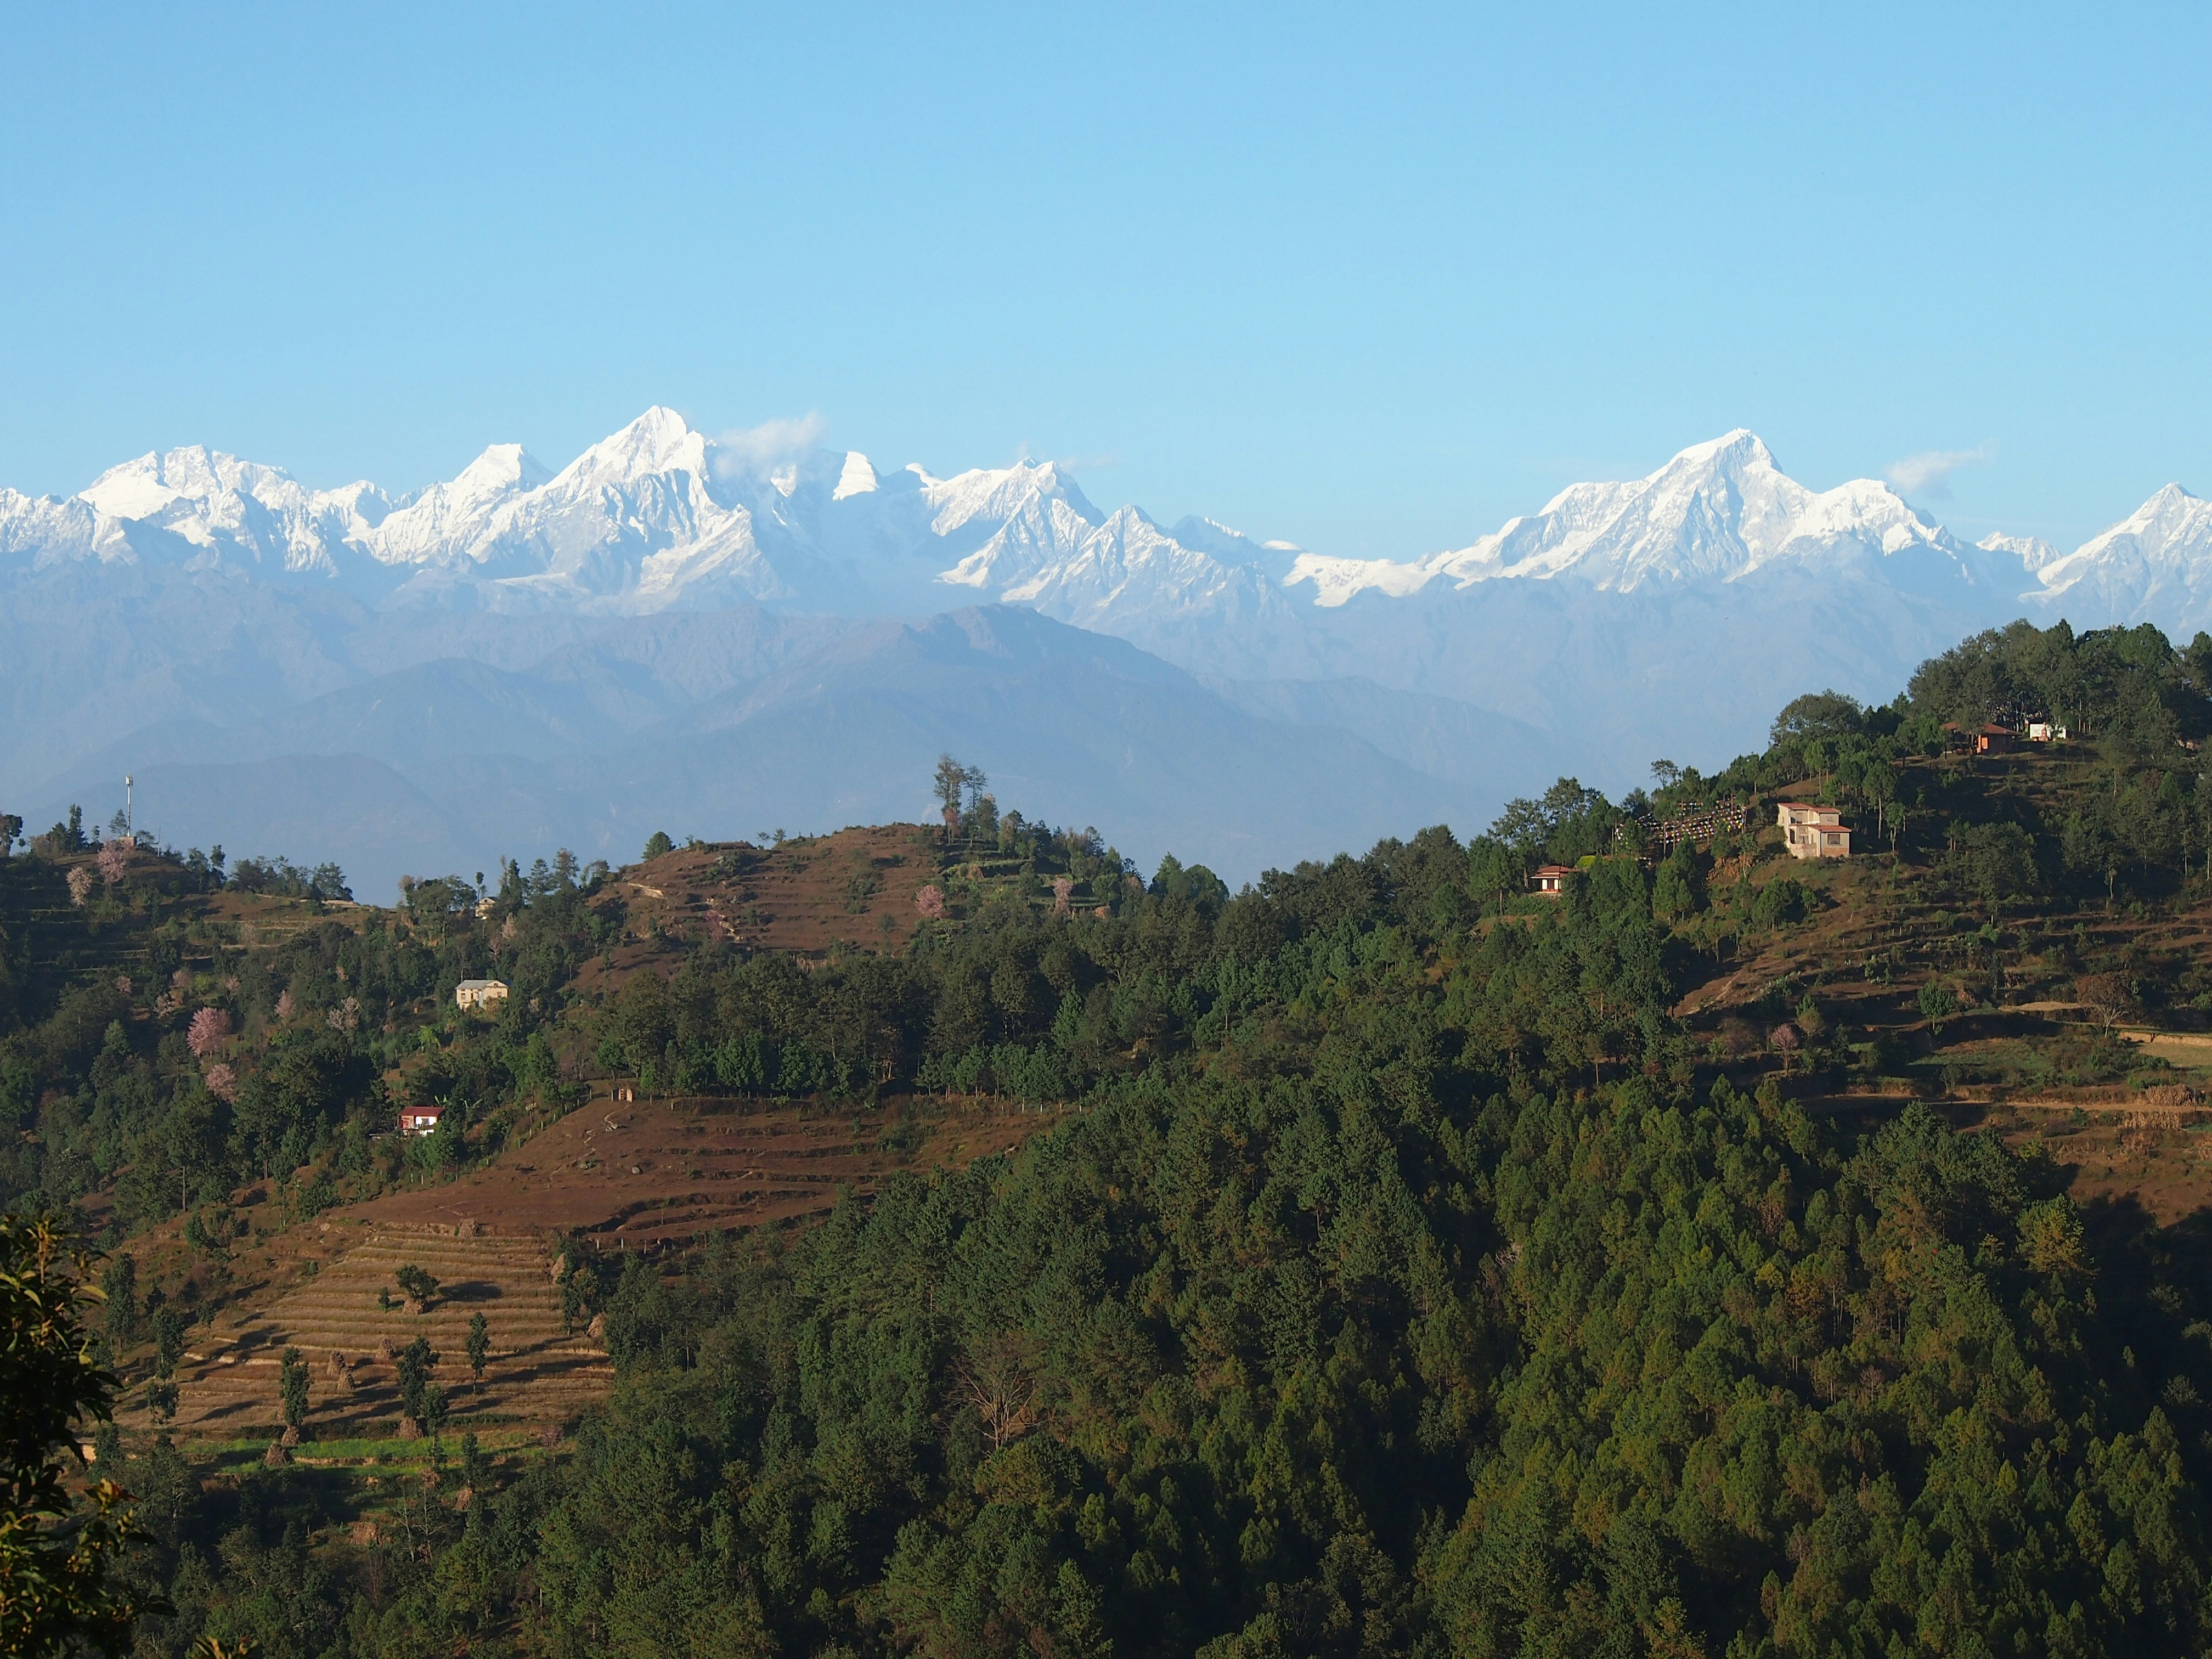 The Himalayas are visible behind a forest of trees on top of brown soil. The sky is clear, and the mountain's snowy peaks are visible in the daylight